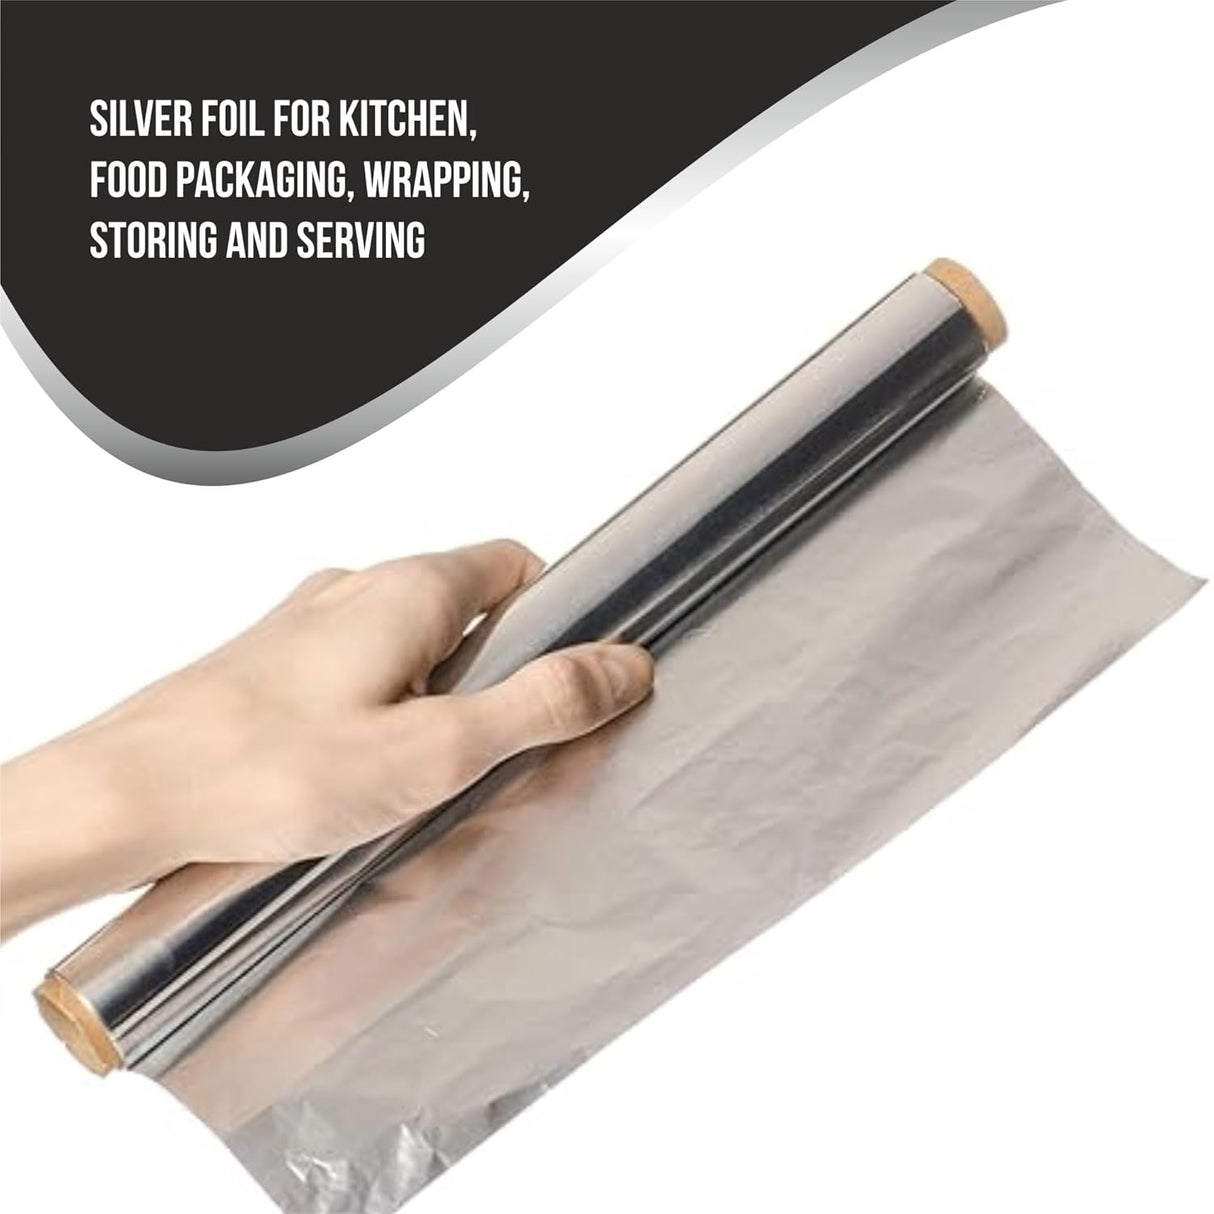 Singhal Aluminum Foil 72 Meters, 11microns | Aluminium Silver Foil for Kitchen, Food Packing, Wrapping, Storing and Serving - Pack of 2